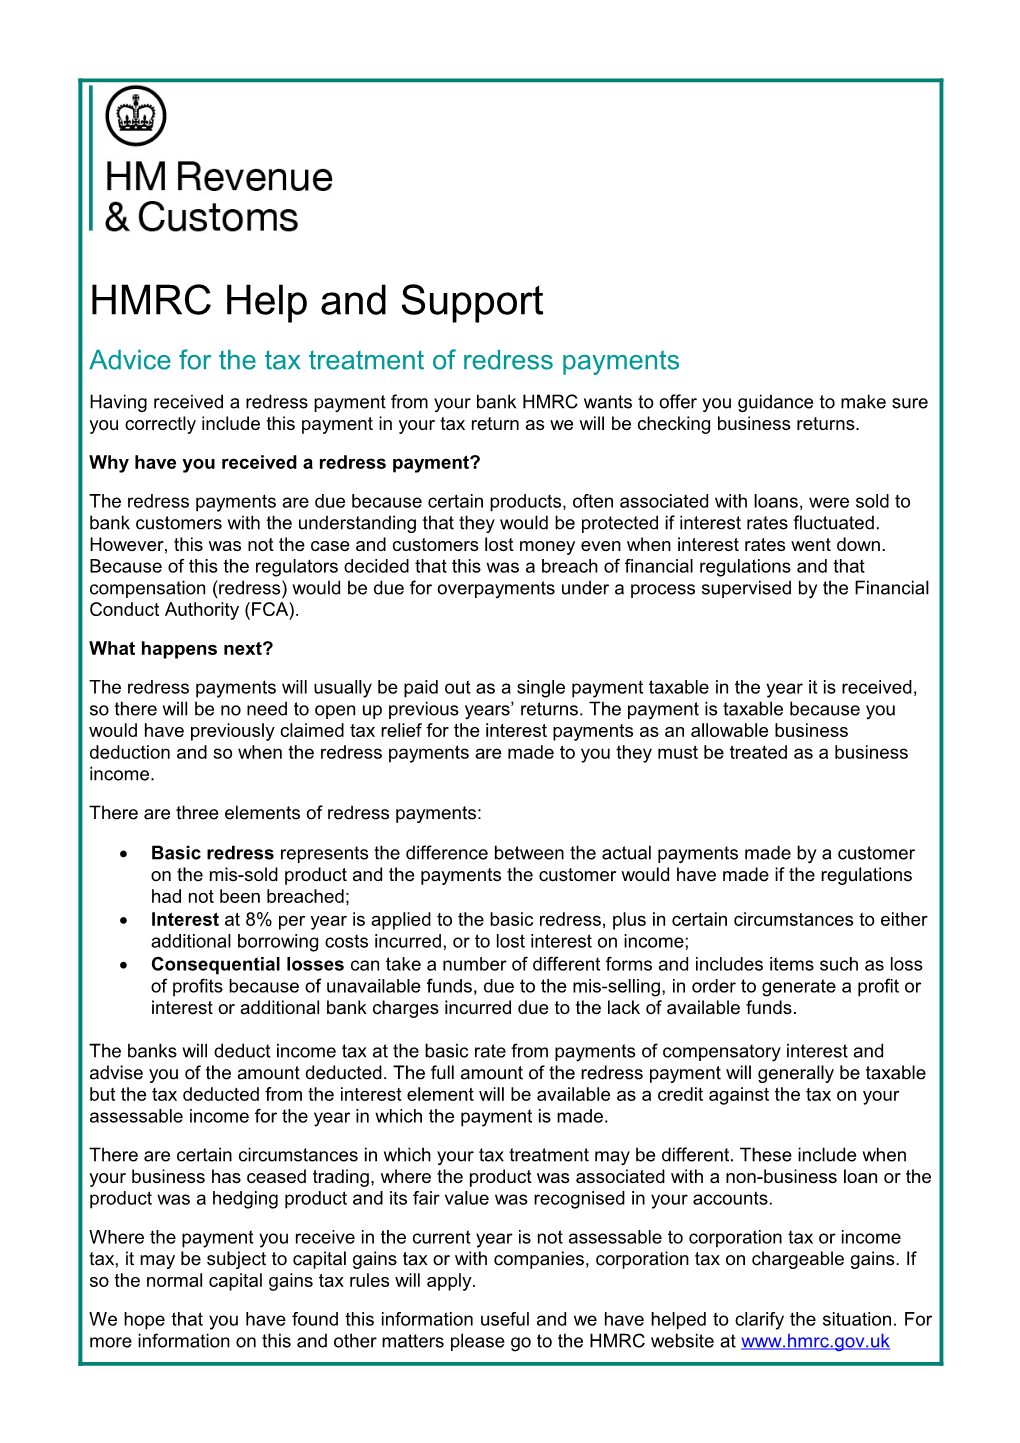 HMRC Help and Support